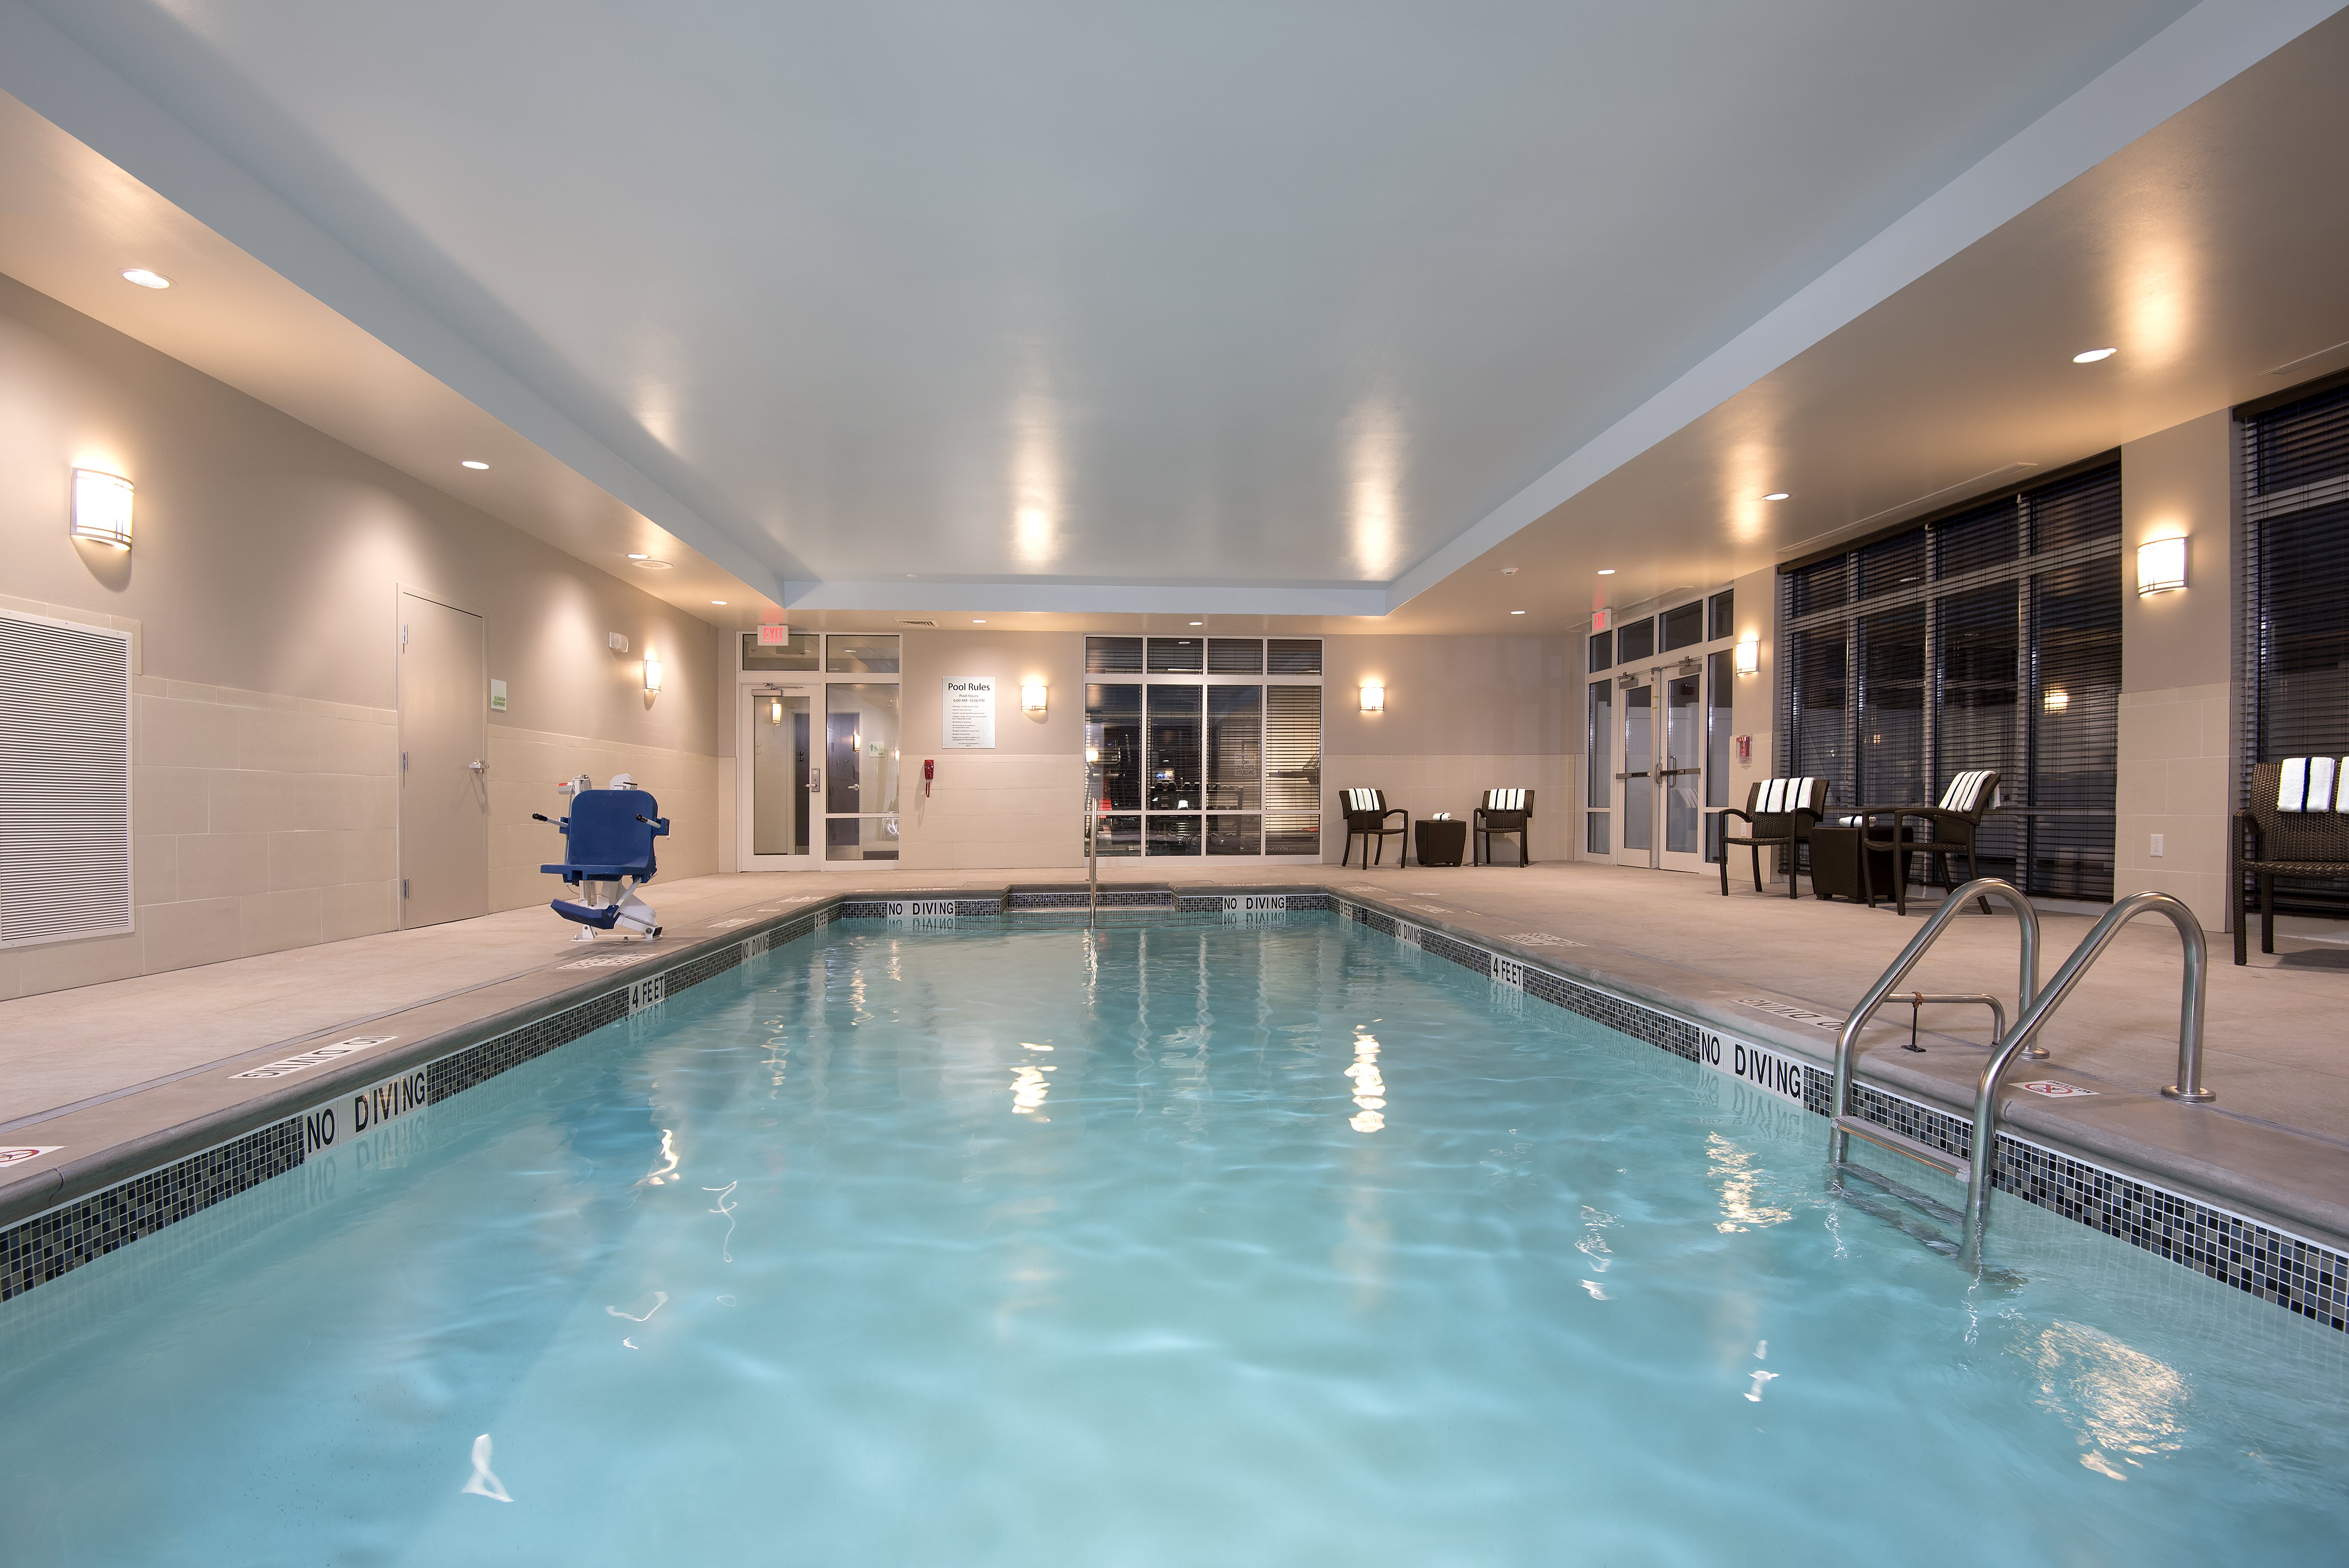 Relax by the pool, or swim for exercise or leisure